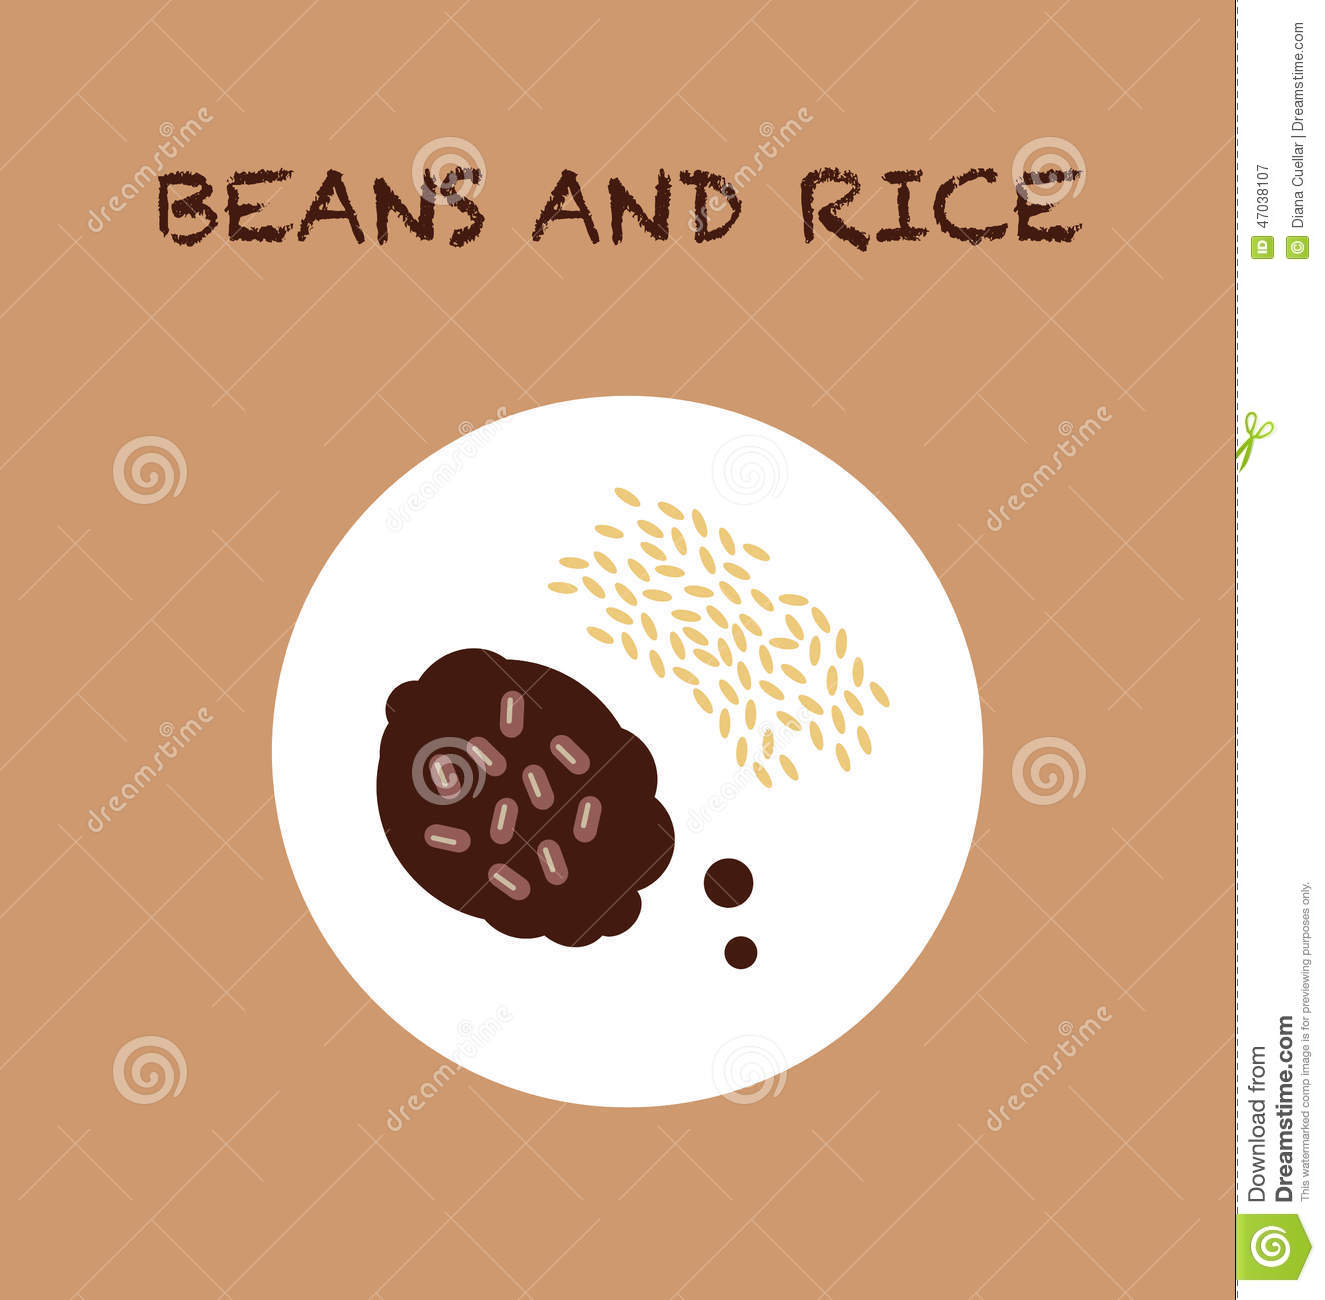 Illustration Of A Typical Food Made With Vectors